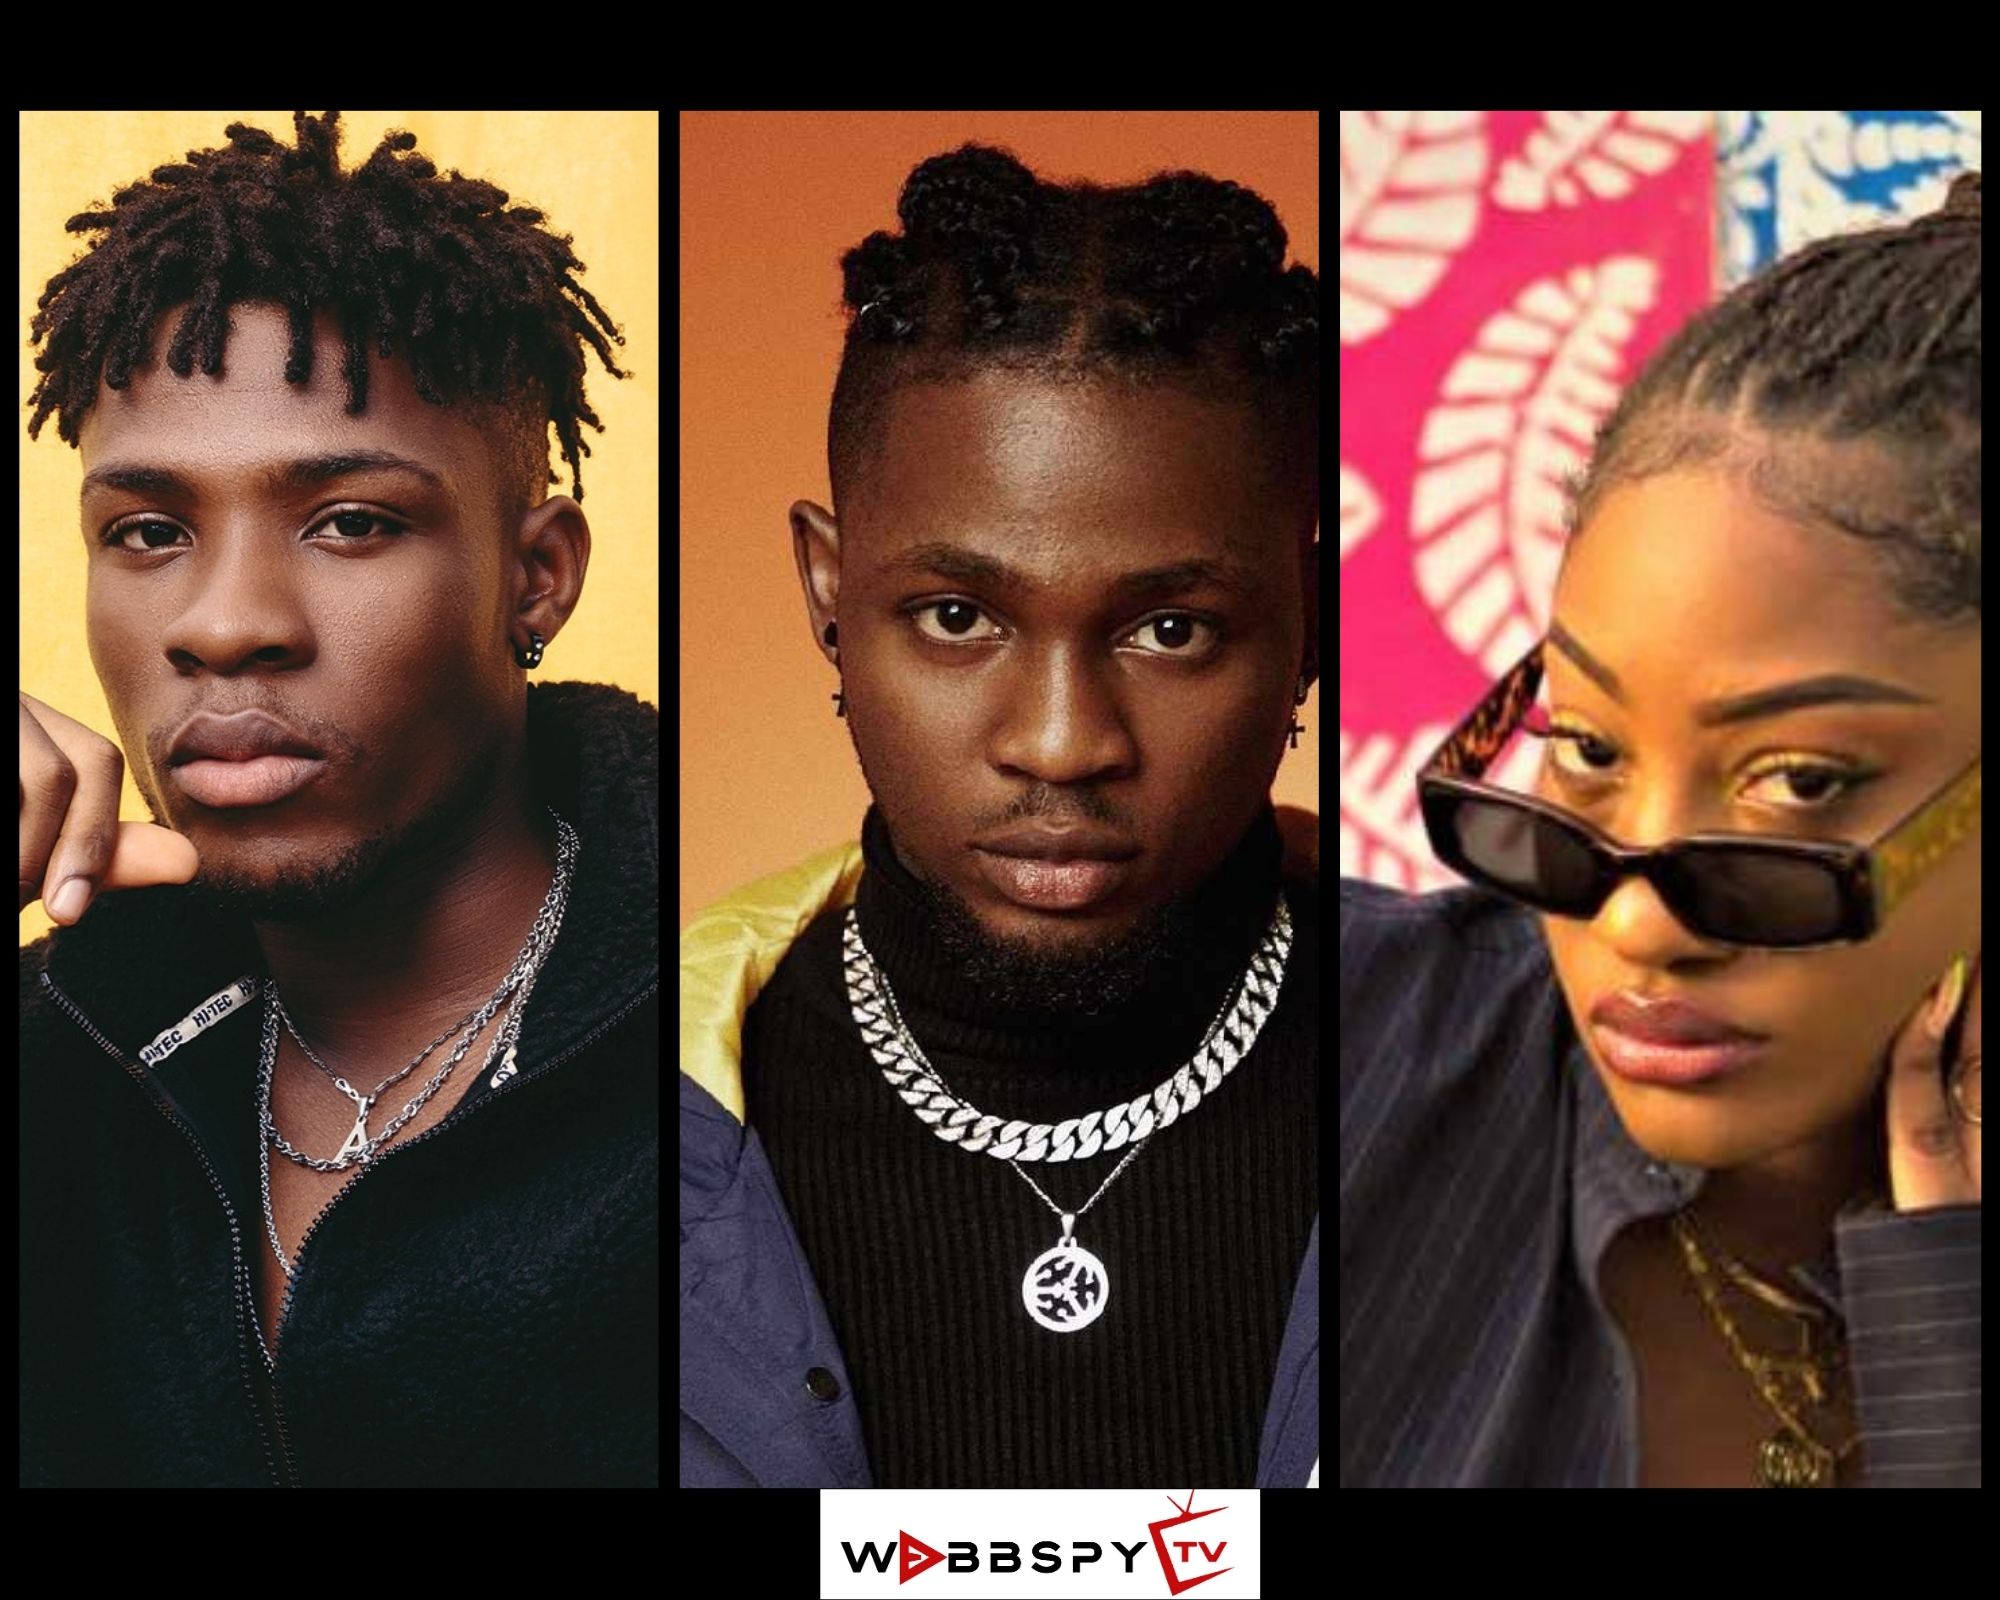 Top 10 Upcoming artists in Nigeria 2021